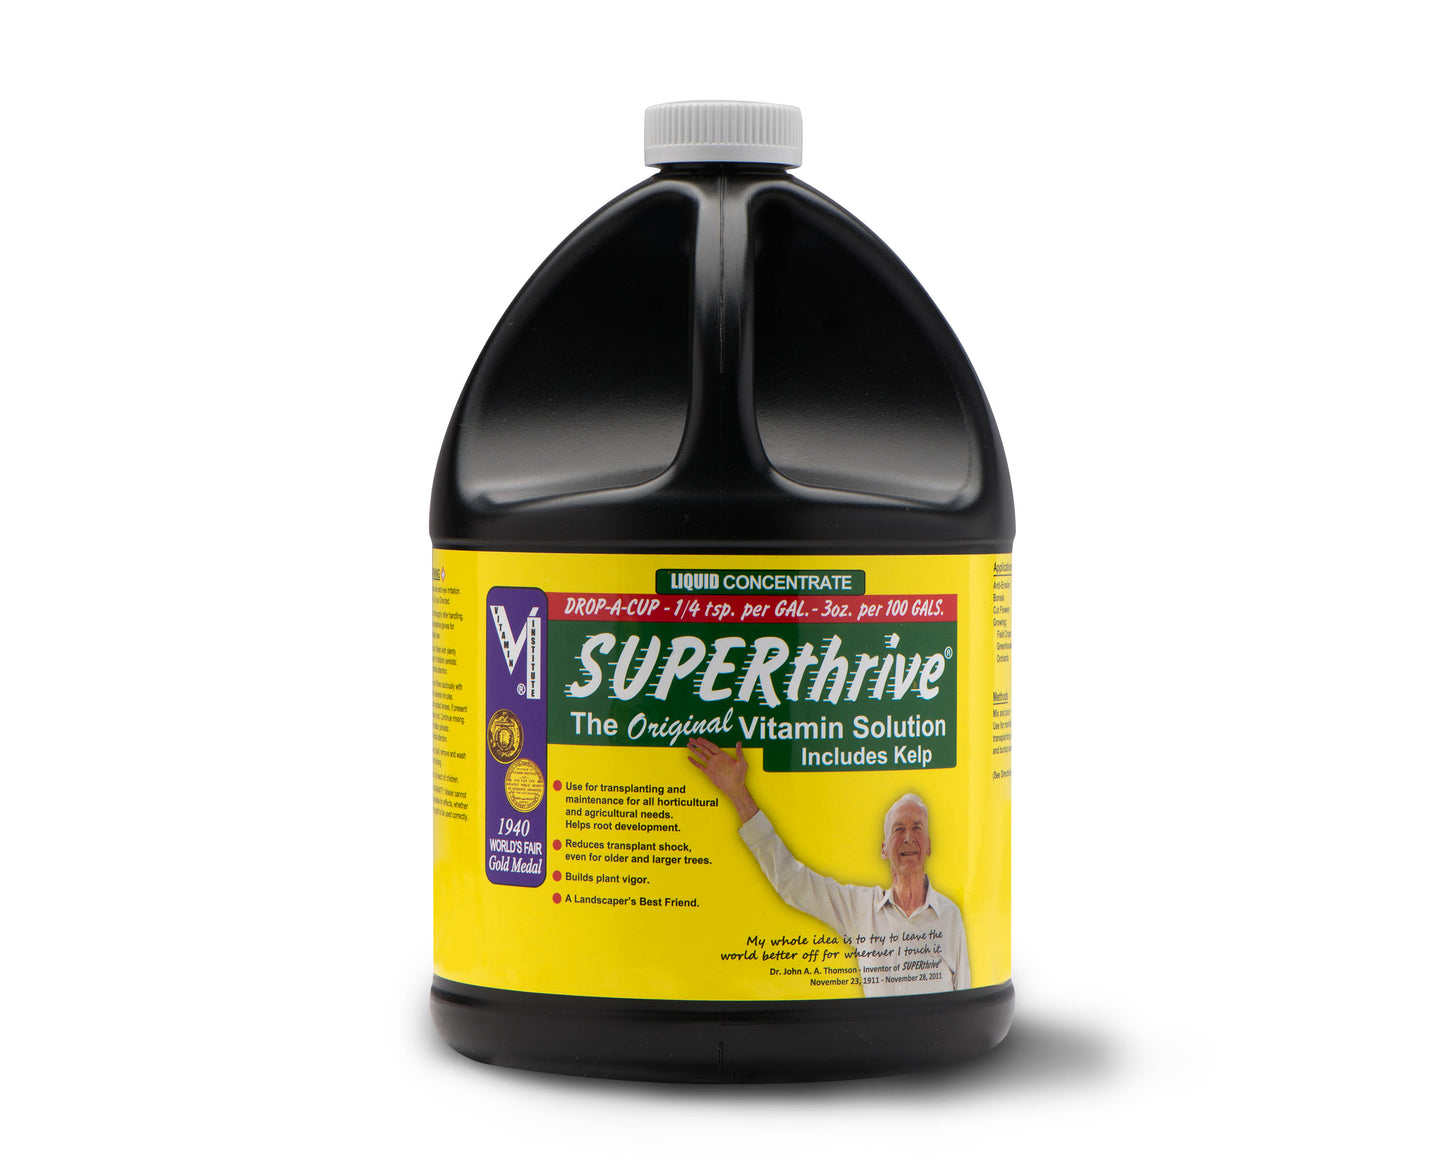 SUPERthrive Original Vitamin Solution with Kelp for all Plants, 1 Gal. 